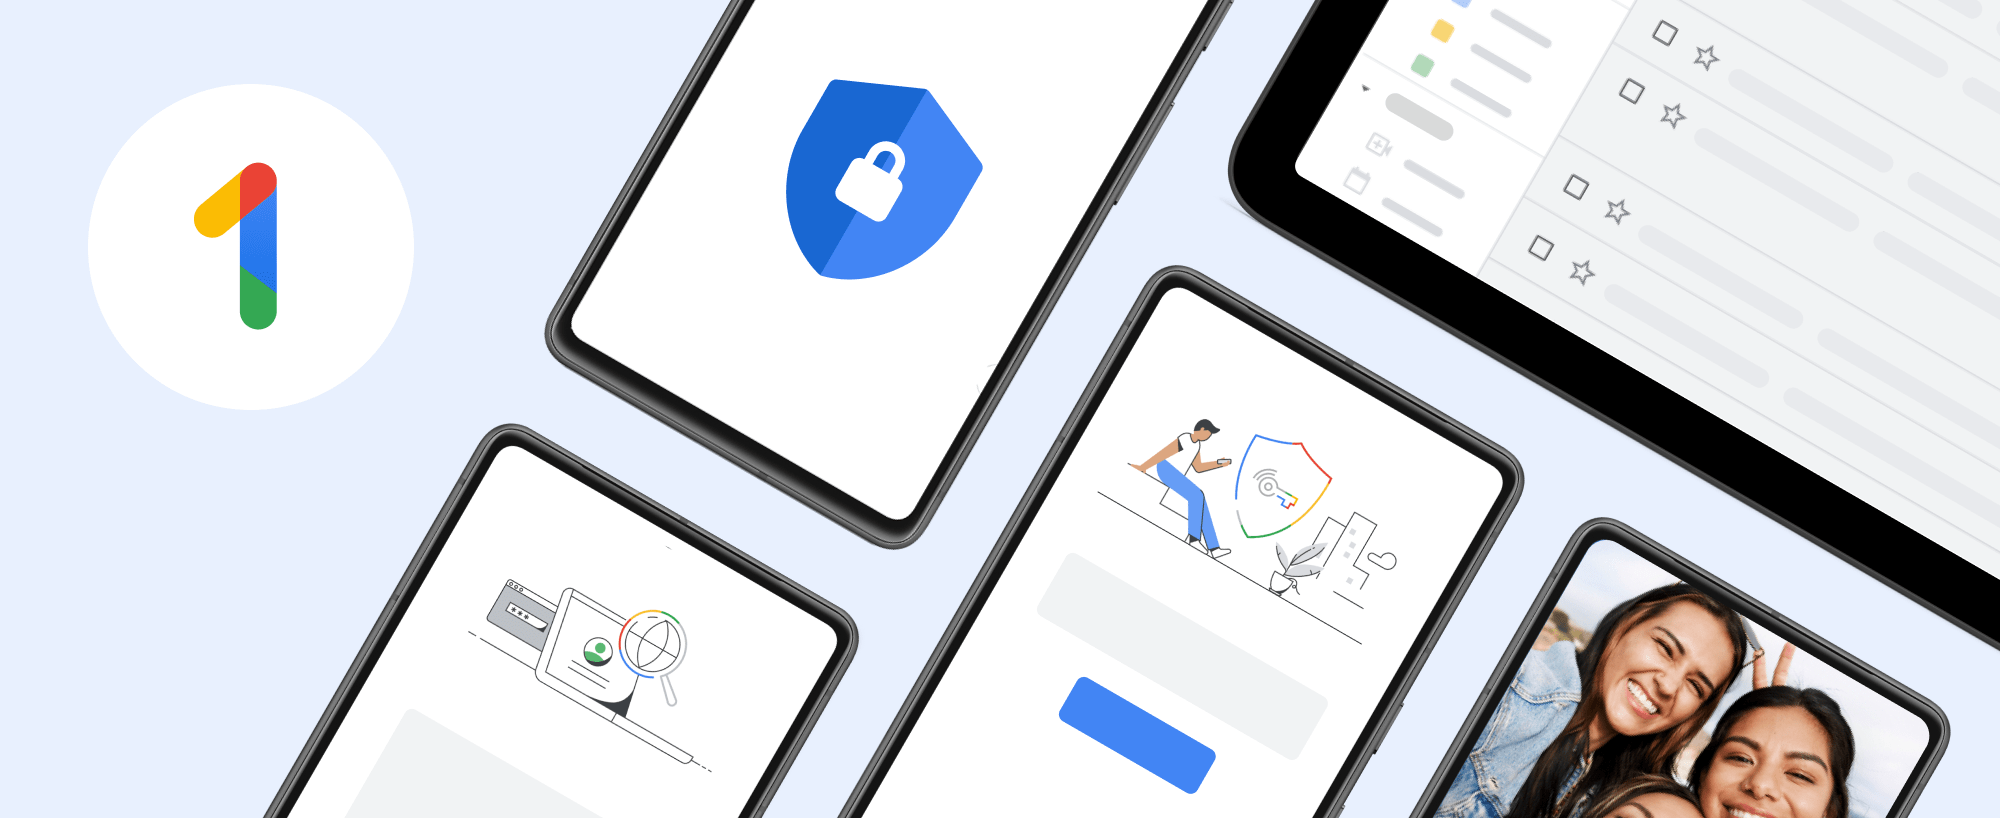 Now You Can Enjoy Free Vpn With Google One Membership